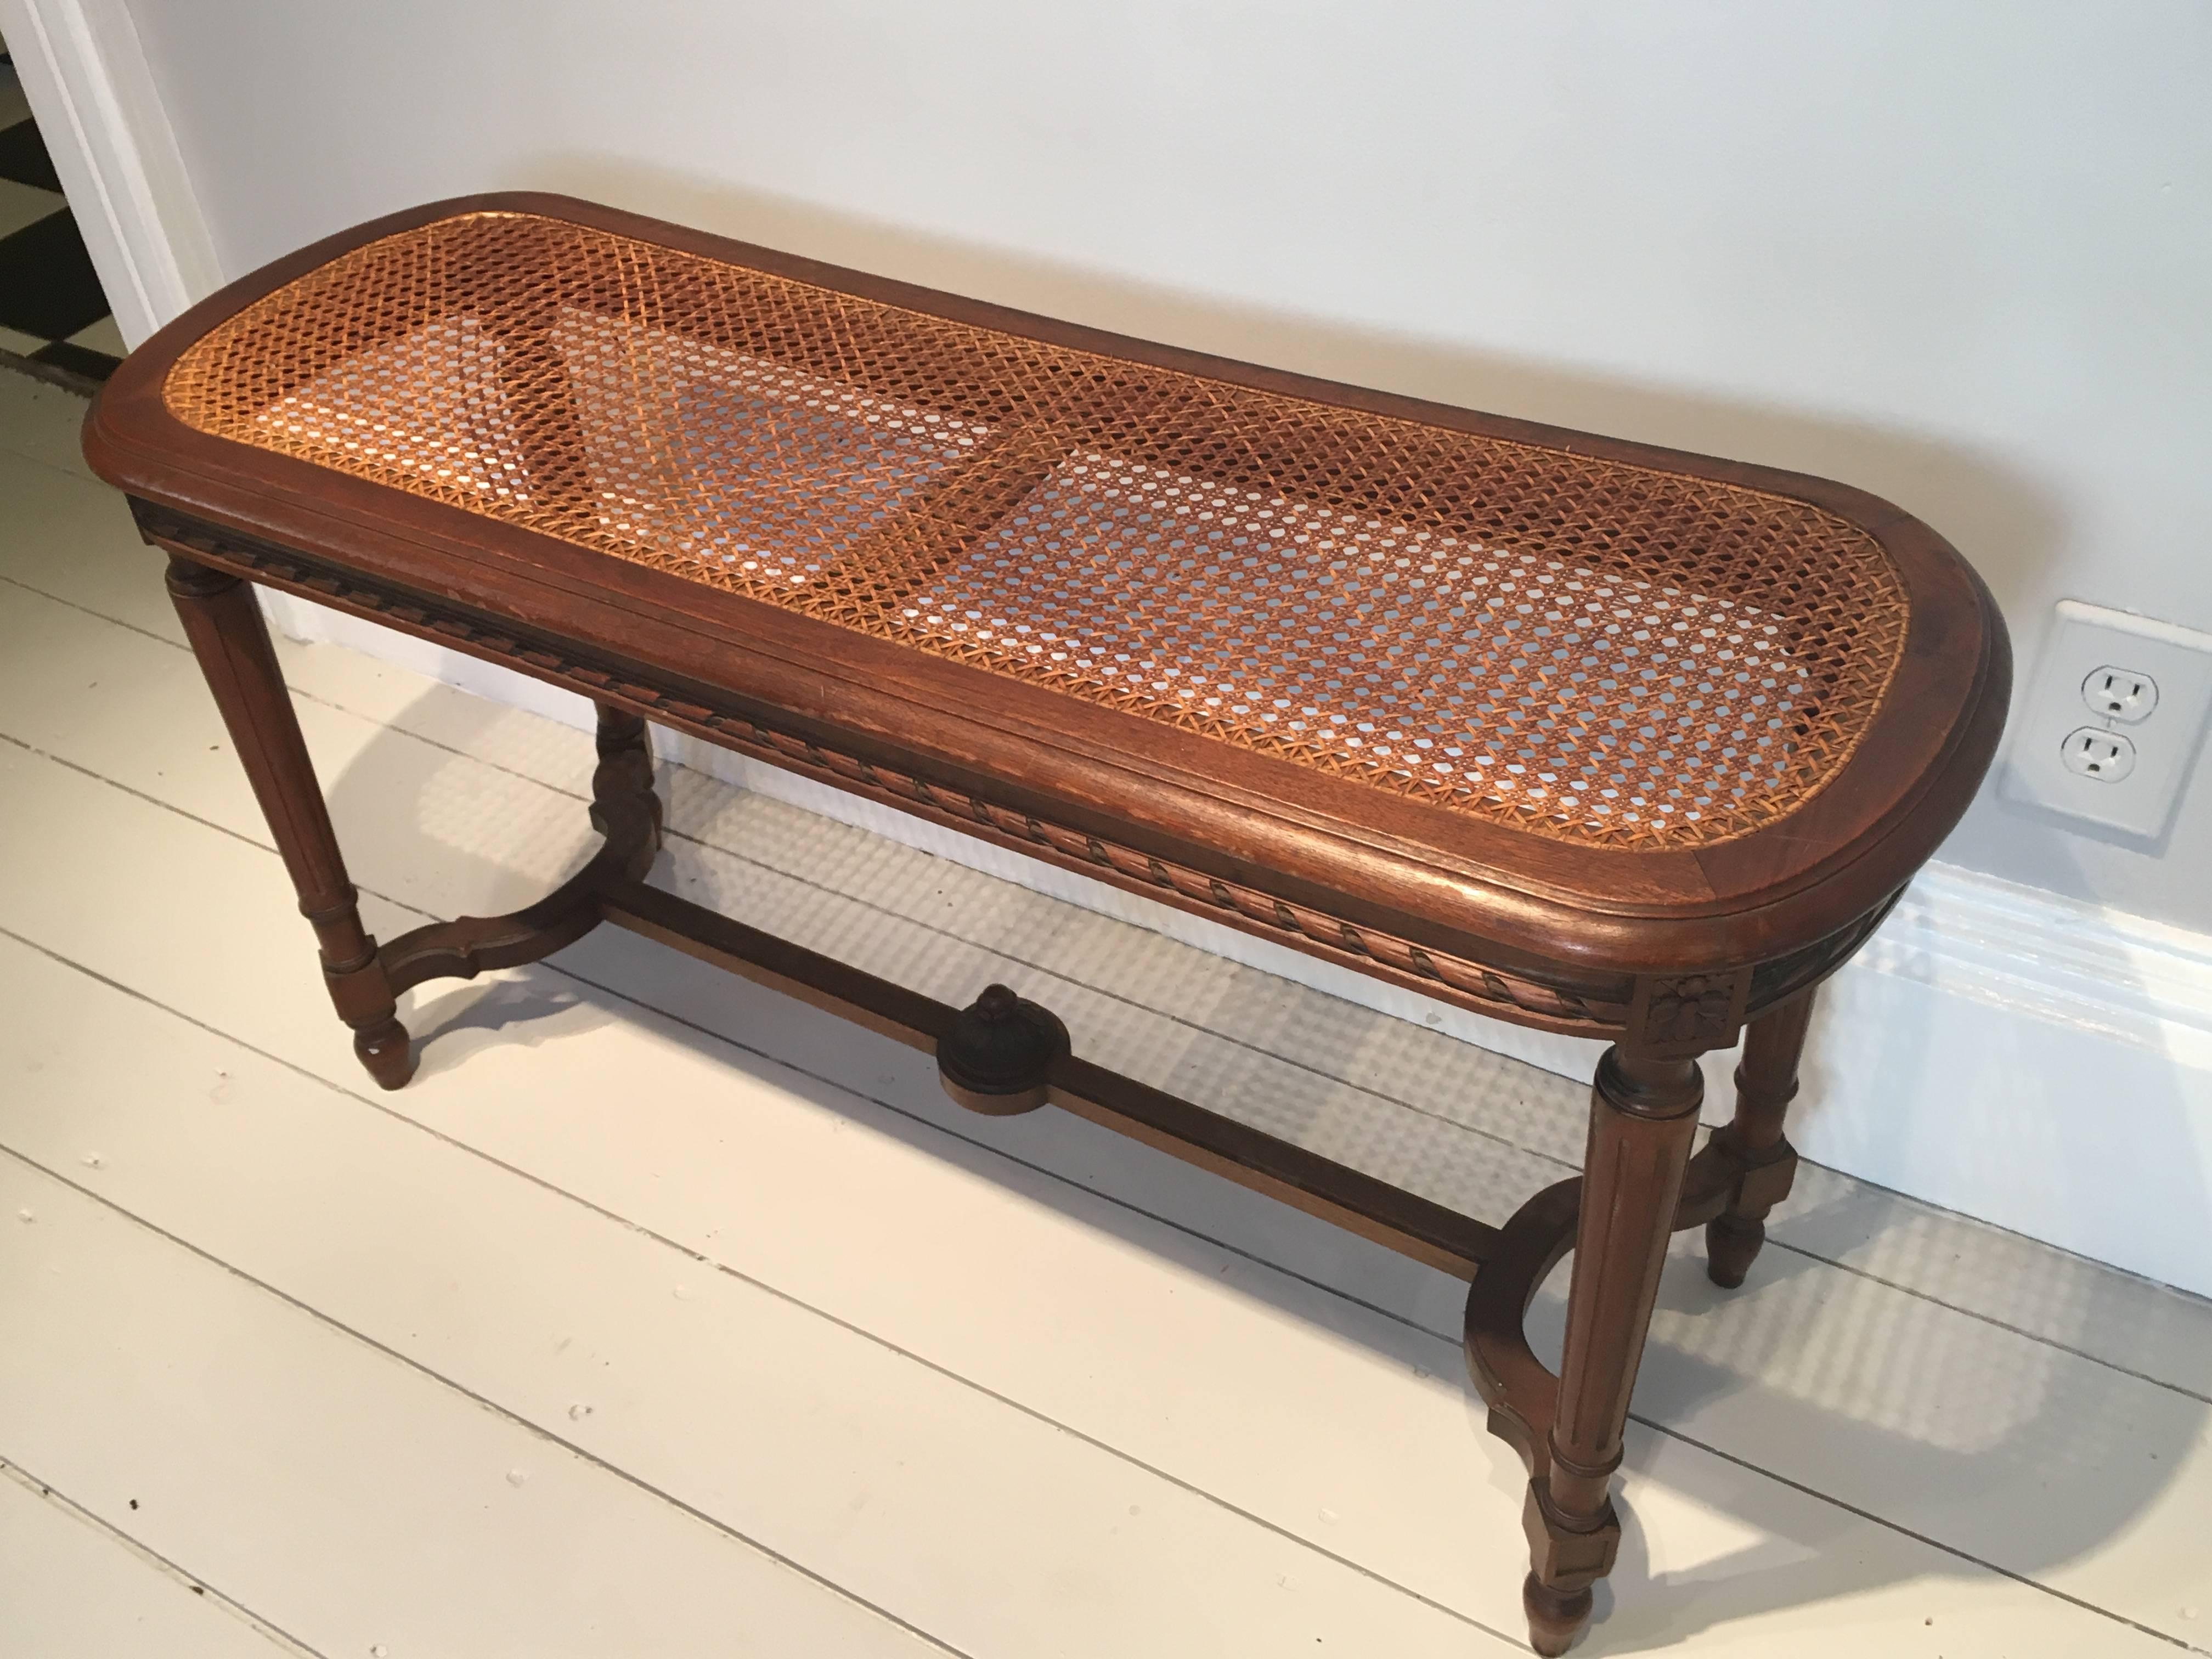 This lovely and utilitarian bench has been hand-carved from walnut with beautiful details and curved ends and side stretchers. The caning is in perfect condition and it would make a stunning addition to the end of a bed or as a coffee table. We are